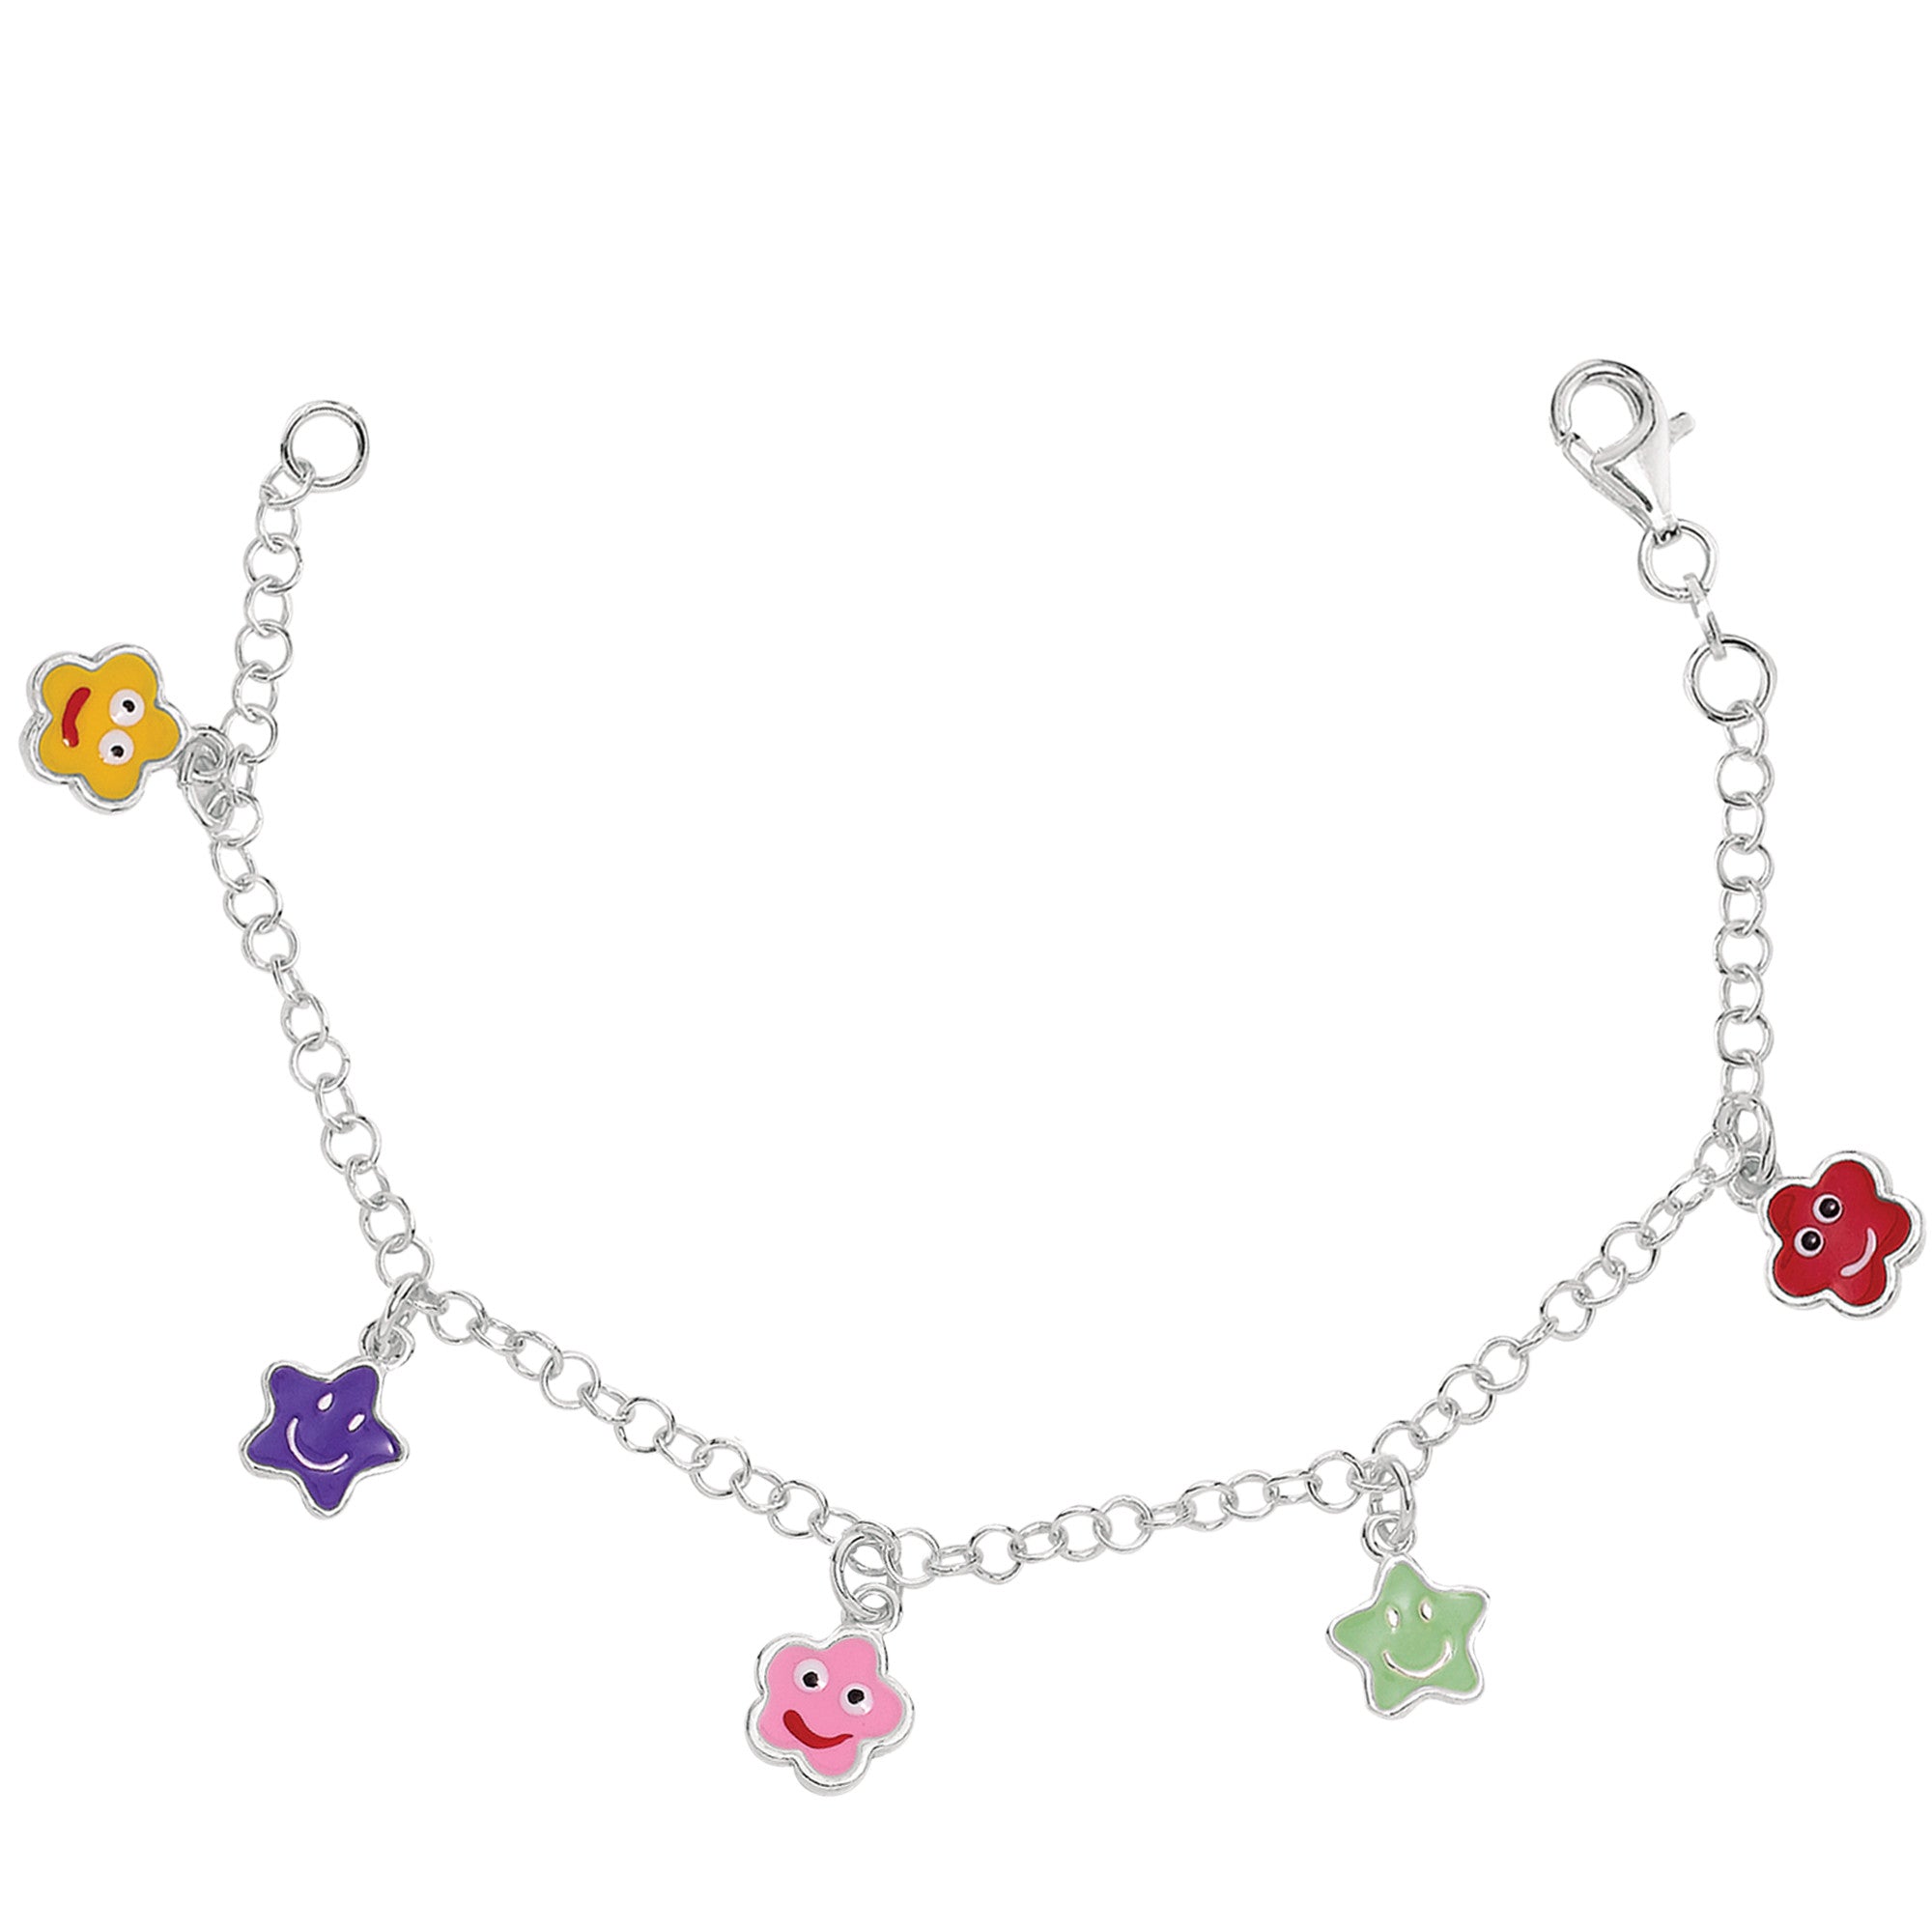 Baby Bracelet With Colorful Dangling Star Charms In Sterling Silver - 6 Inches fine designer jewelry for men and women